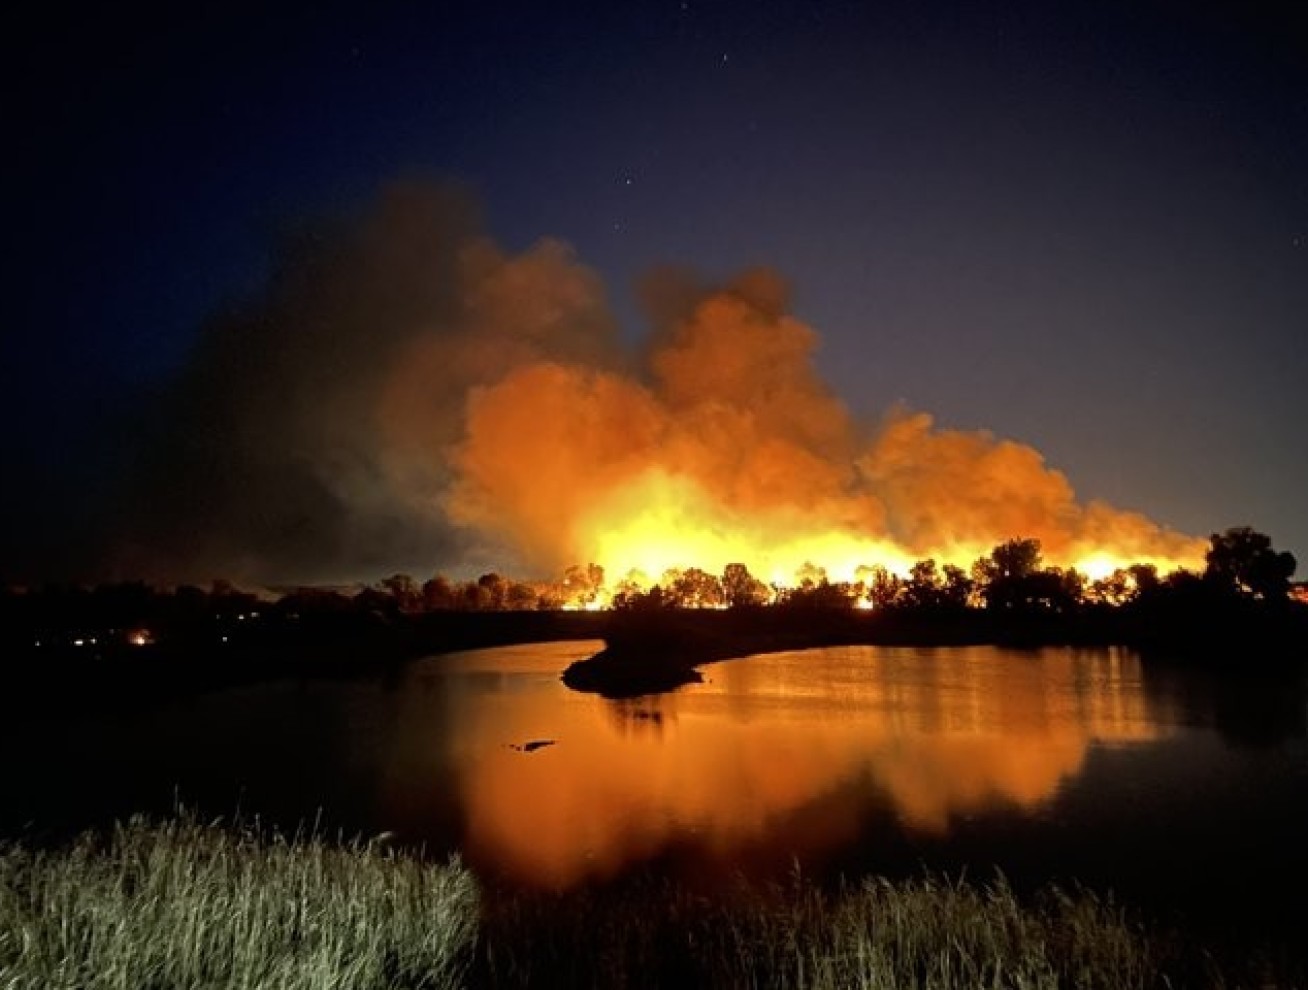 Photo: At night, a wildfire rages in the distance, with a lake in the foreground